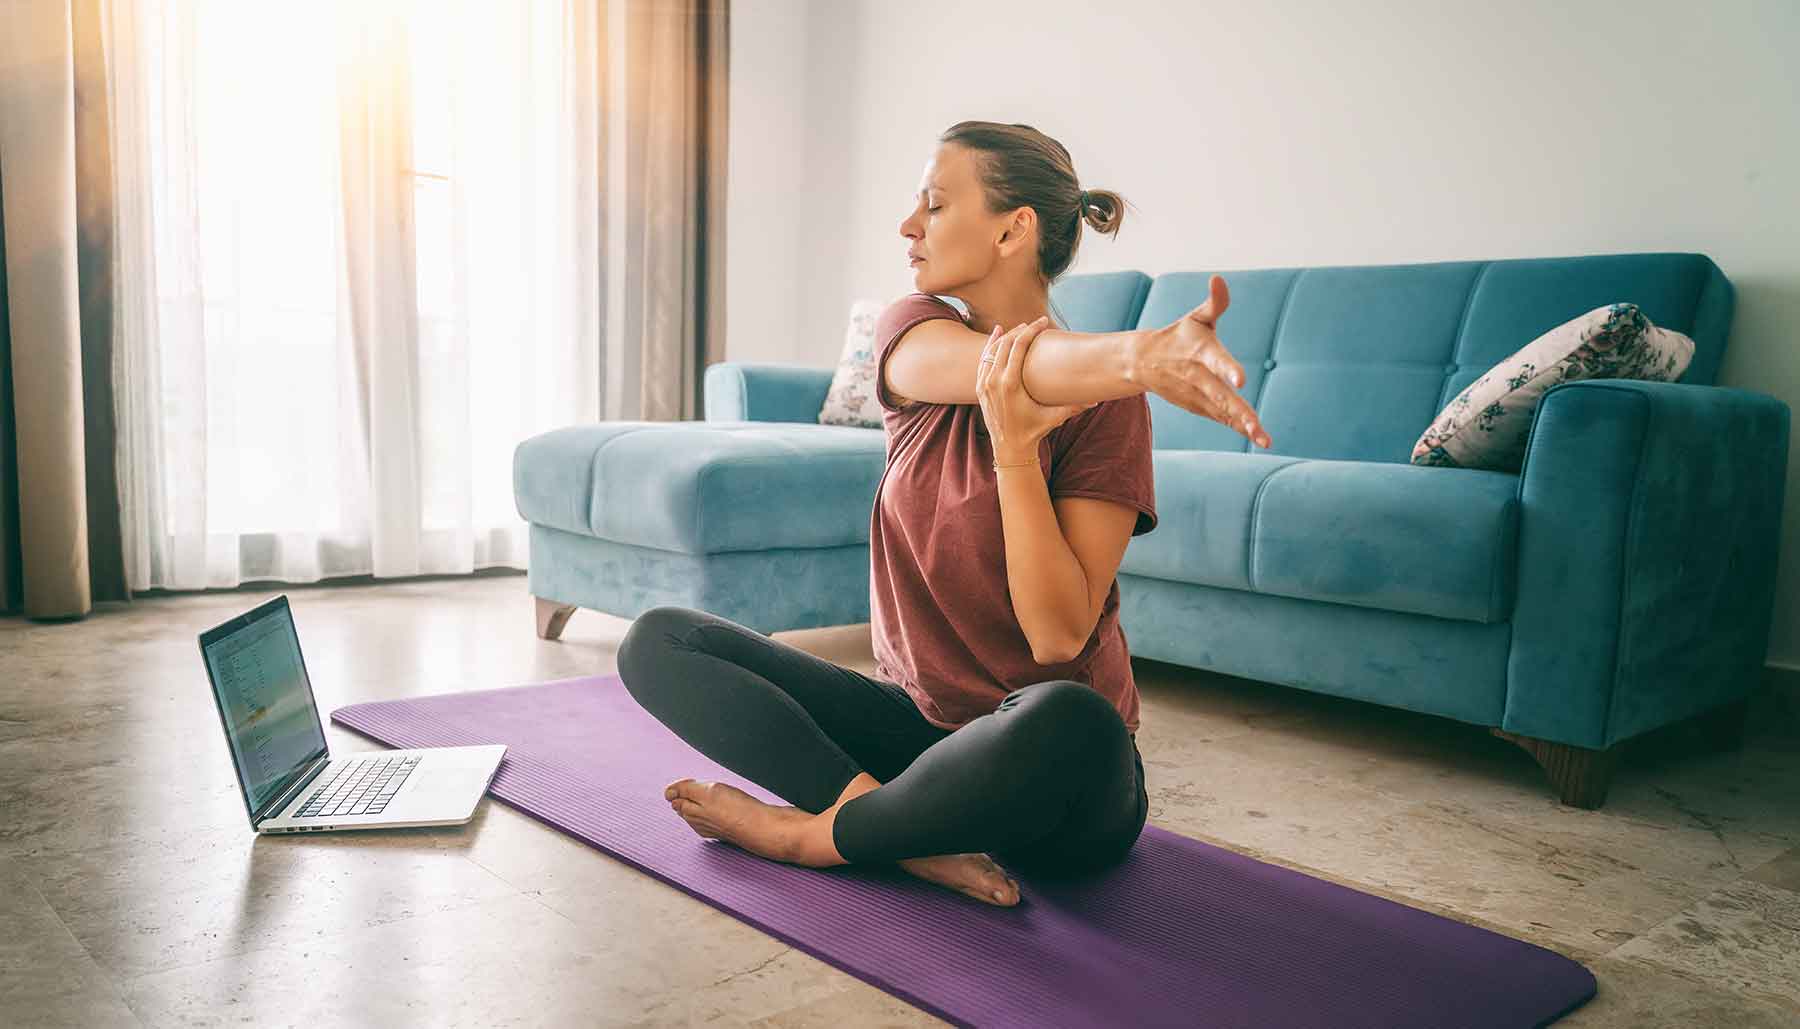 woman sitting on yoga mat in living room with laptop, stretching